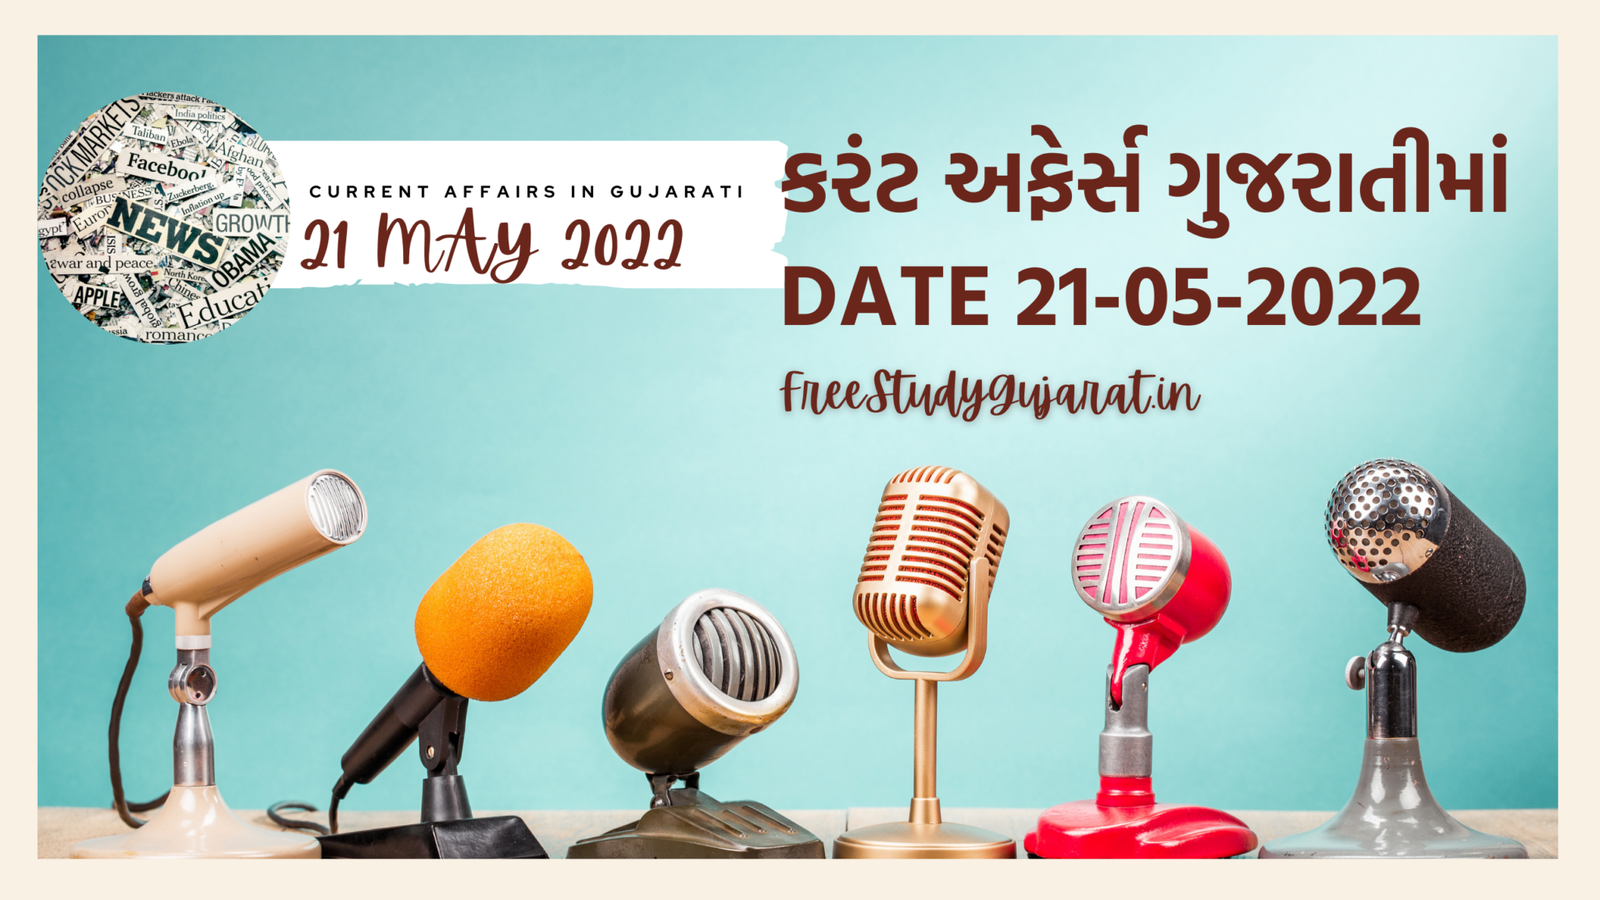 21 MAY 2022 CURRENT AFFAIRS IN GUJARATI